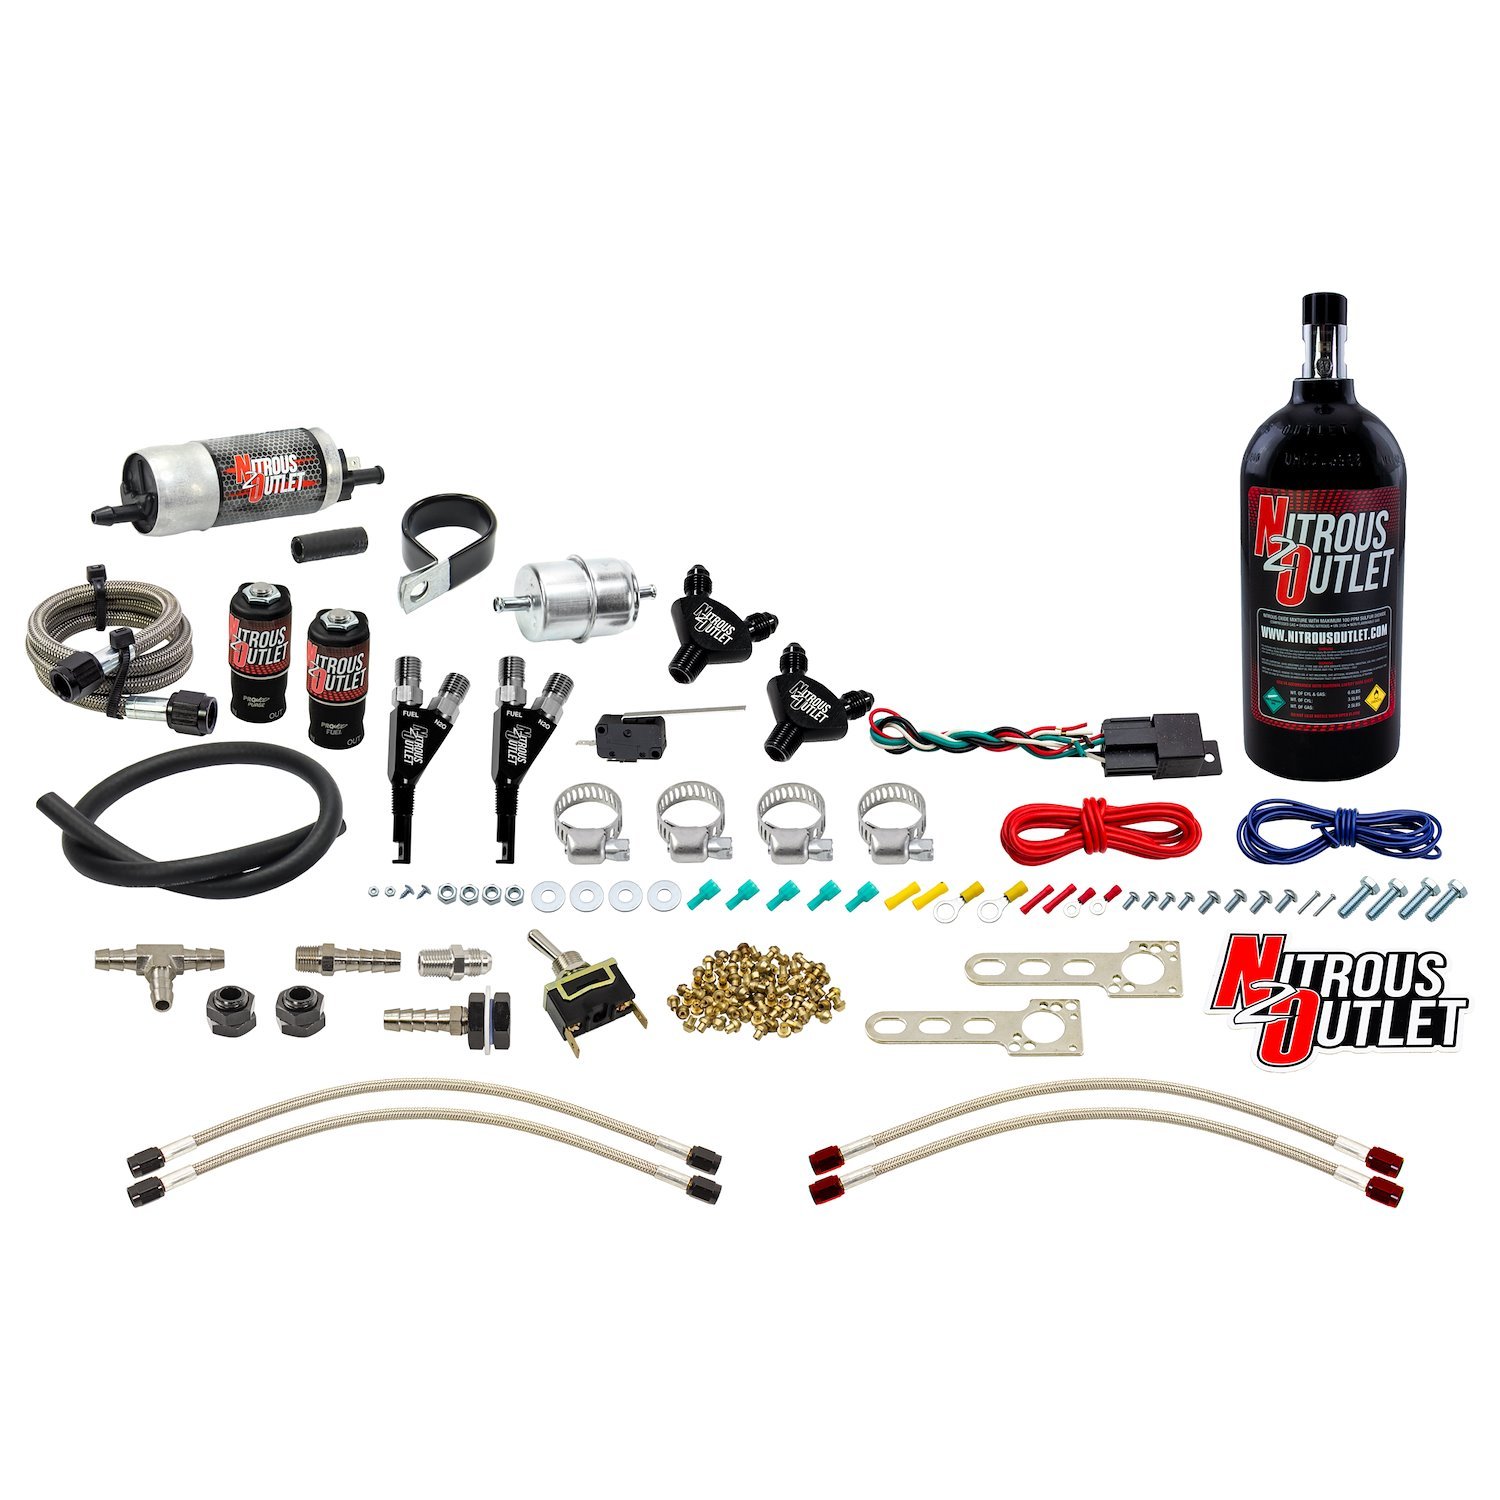 50-10020-2.5 Powersports Twin-Cyl Wet Nozzle System, Aluminum 90-Degree Nozzles, Gas, 6 psi, 2030405060 HP, 2.5LB Bottle